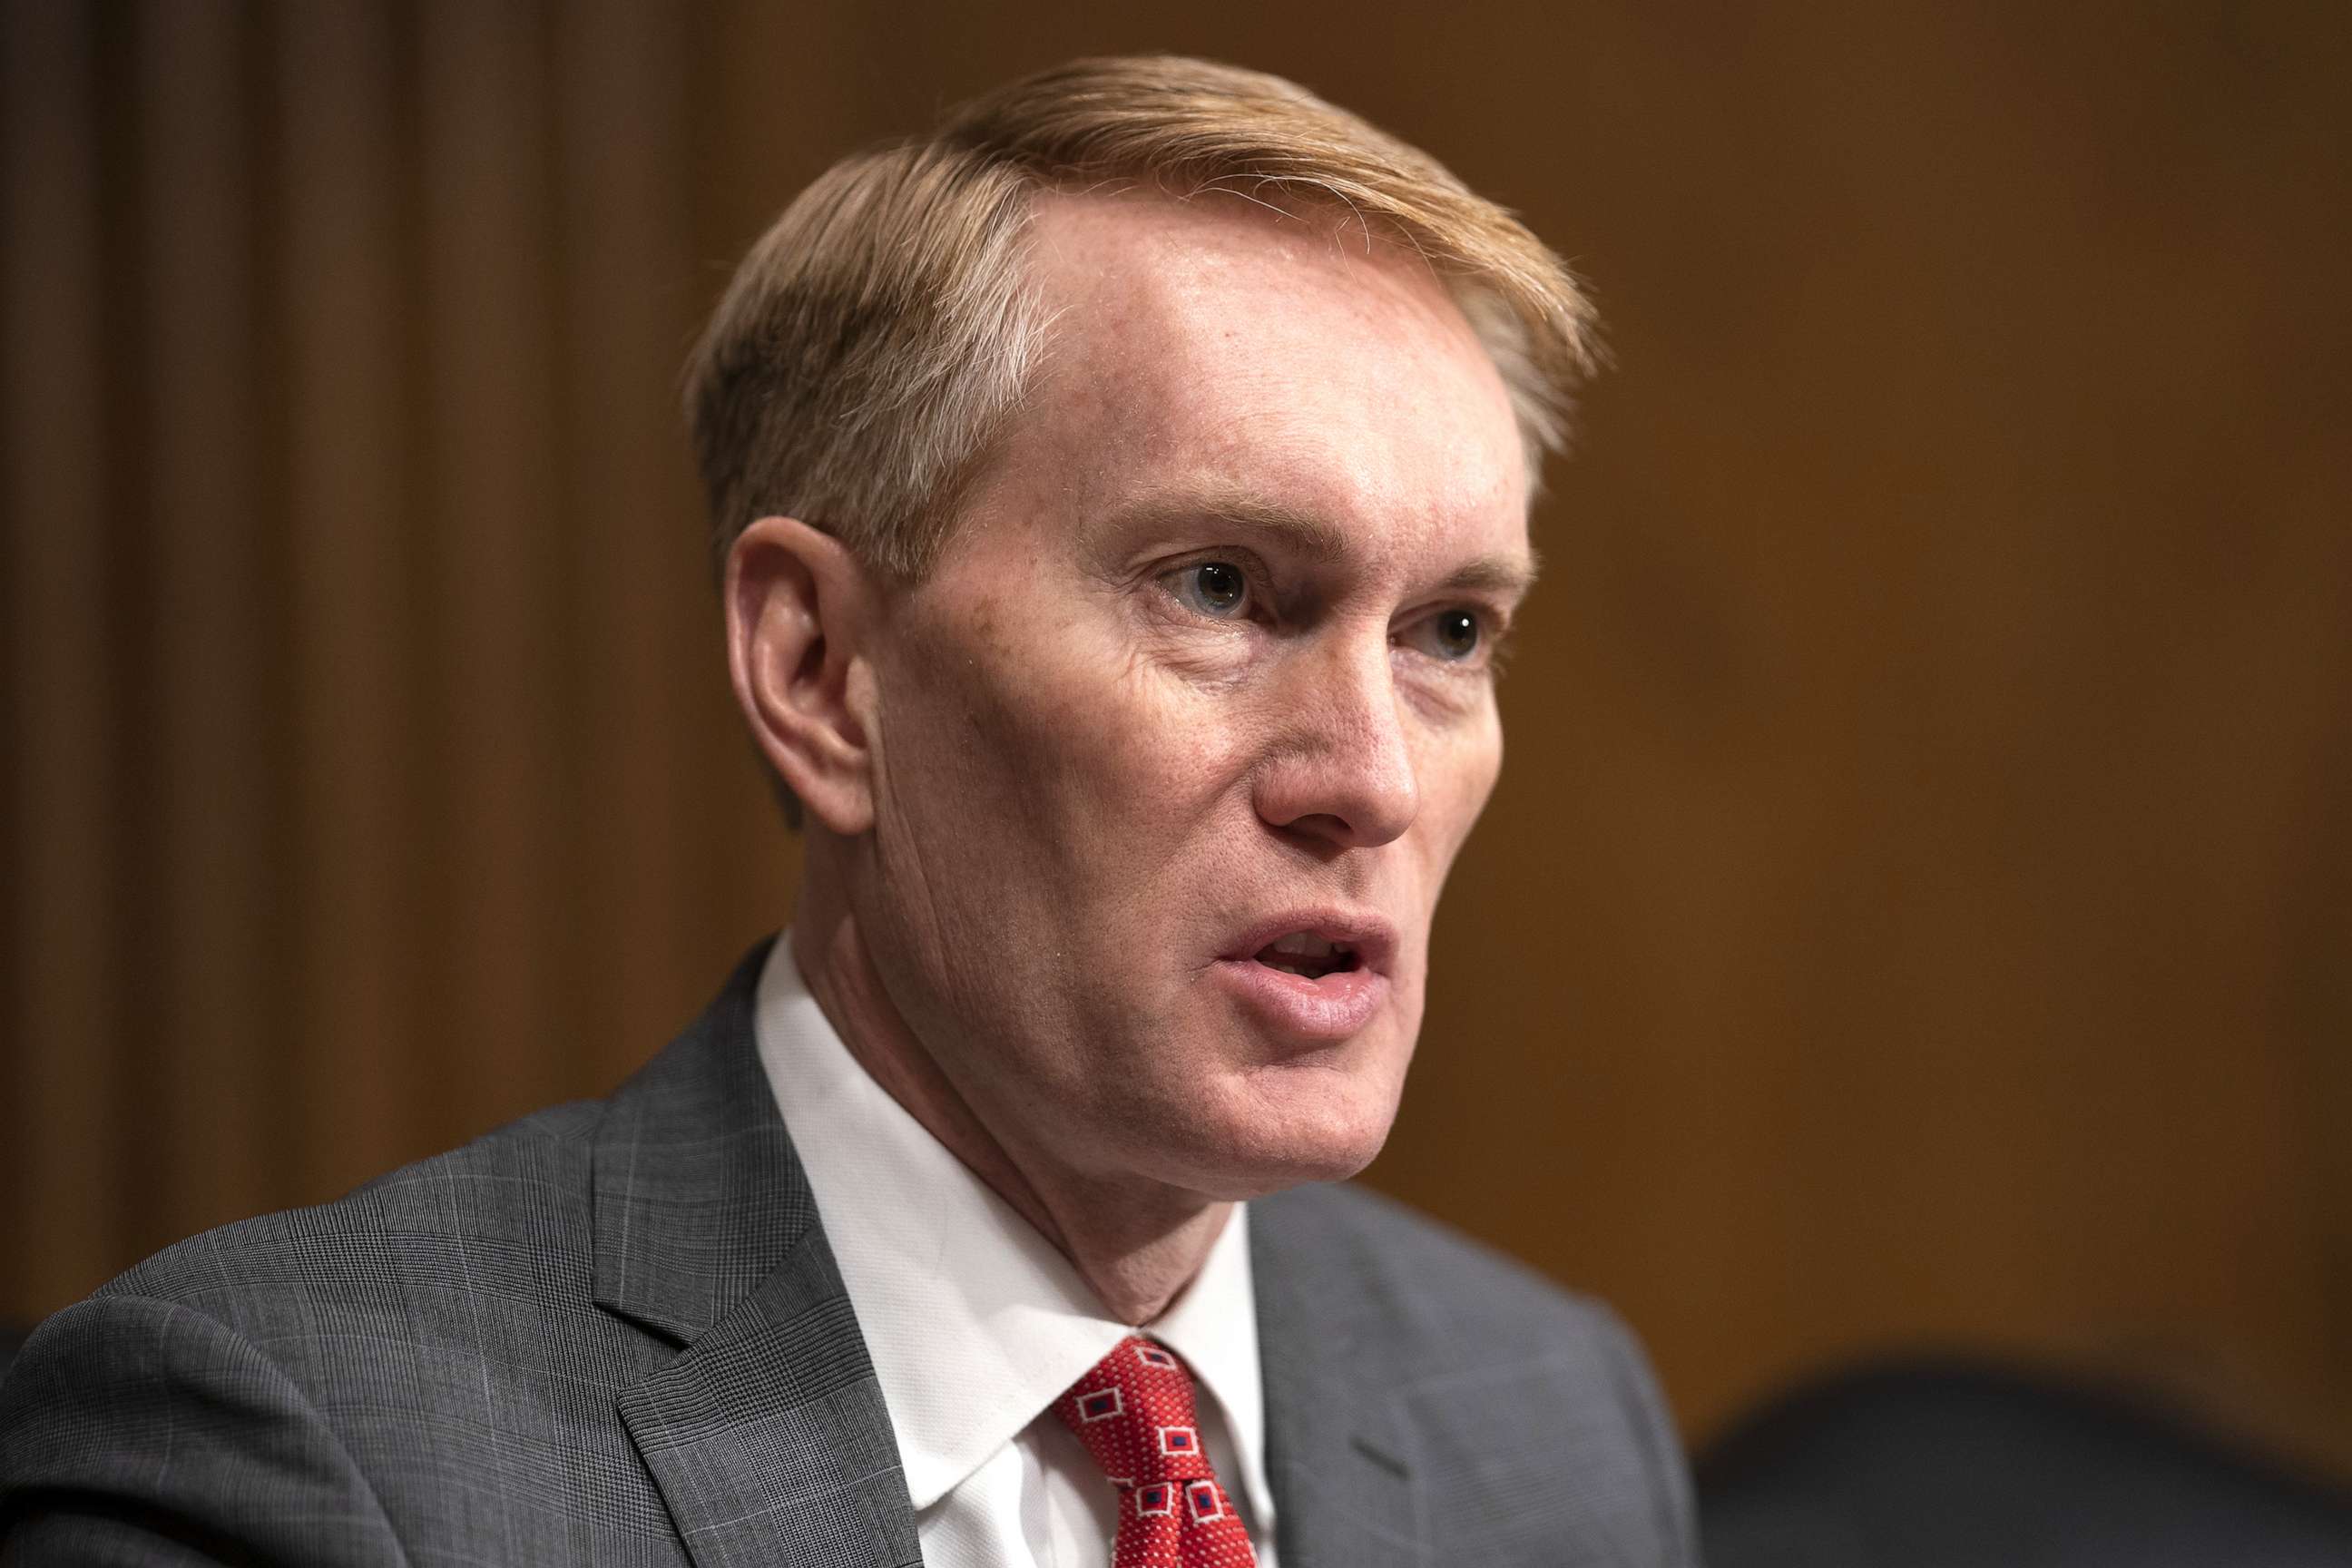 PHOTO: Senator James Lankford during a hearing of the Senate Homeland Security and Governmental Affairs Committee on at the Capitol, April 18, 2023.